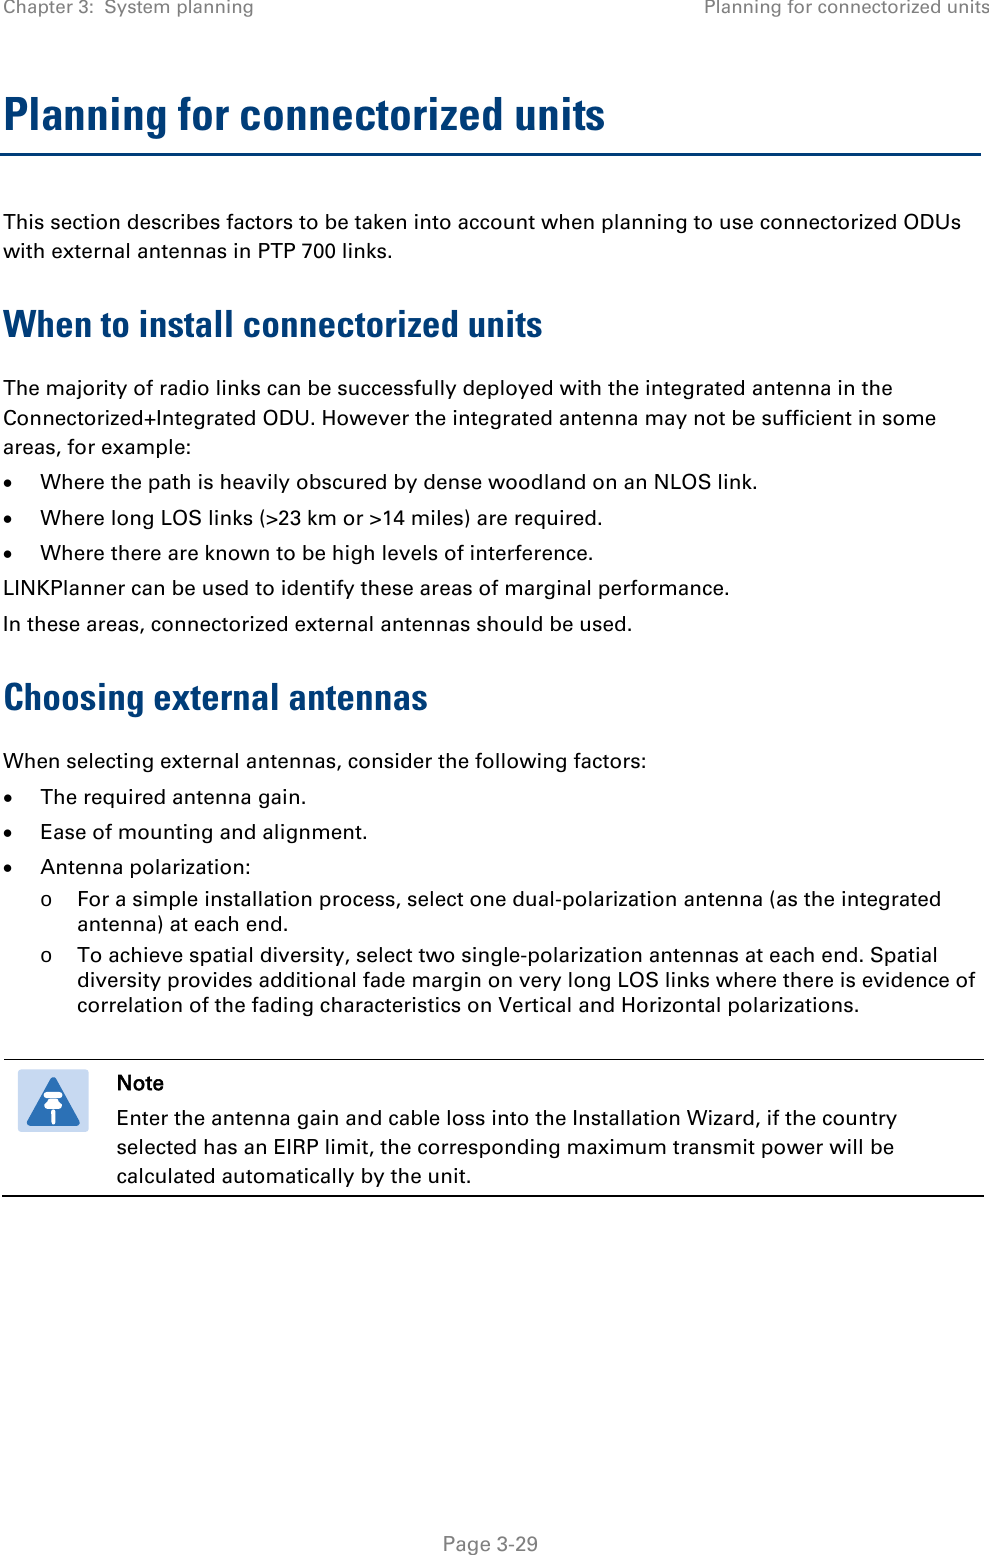 Chapter 3:  System planning Planning for connectorized units  Planning for connectorized units This section describes factors to be taken into account when planning to use connectorized ODUs with external antennas in PTP 700 links. When to install connectorized units The majority of radio links can be successfully deployed with the integrated antenna in the Connectorized+Integrated ODU. However the integrated antenna may not be sufficient in some areas, for example: • Where the path is heavily obscured by dense woodland on an NLOS link. • Where long LOS links (&gt;23 km or &gt;14 miles) are required.  • Where there are known to be high levels of interference. LINKPlanner can be used to identify these areas of marginal performance. In these areas, connectorized external antennas should be used. Choosing external antennas When selecting external antennas, consider the following factors: • The required antenna gain. • Ease of mounting and alignment. • Antenna polarization: o For a simple installation process, select one dual-polarization antenna (as the integrated antenna) at each end. o To achieve spatial diversity, select two single-polarization antennas at each end. Spatial diversity provides additional fade margin on very long LOS links where there is evidence of correlation of the fading characteristics on Vertical and Horizontal polarizations.   Note Enter the antenna gain and cable loss into the Installation Wizard, if the country selected has an EIRP limit, the corresponding maximum transmit power will be calculated automatically by the unit.    Page 3-29 